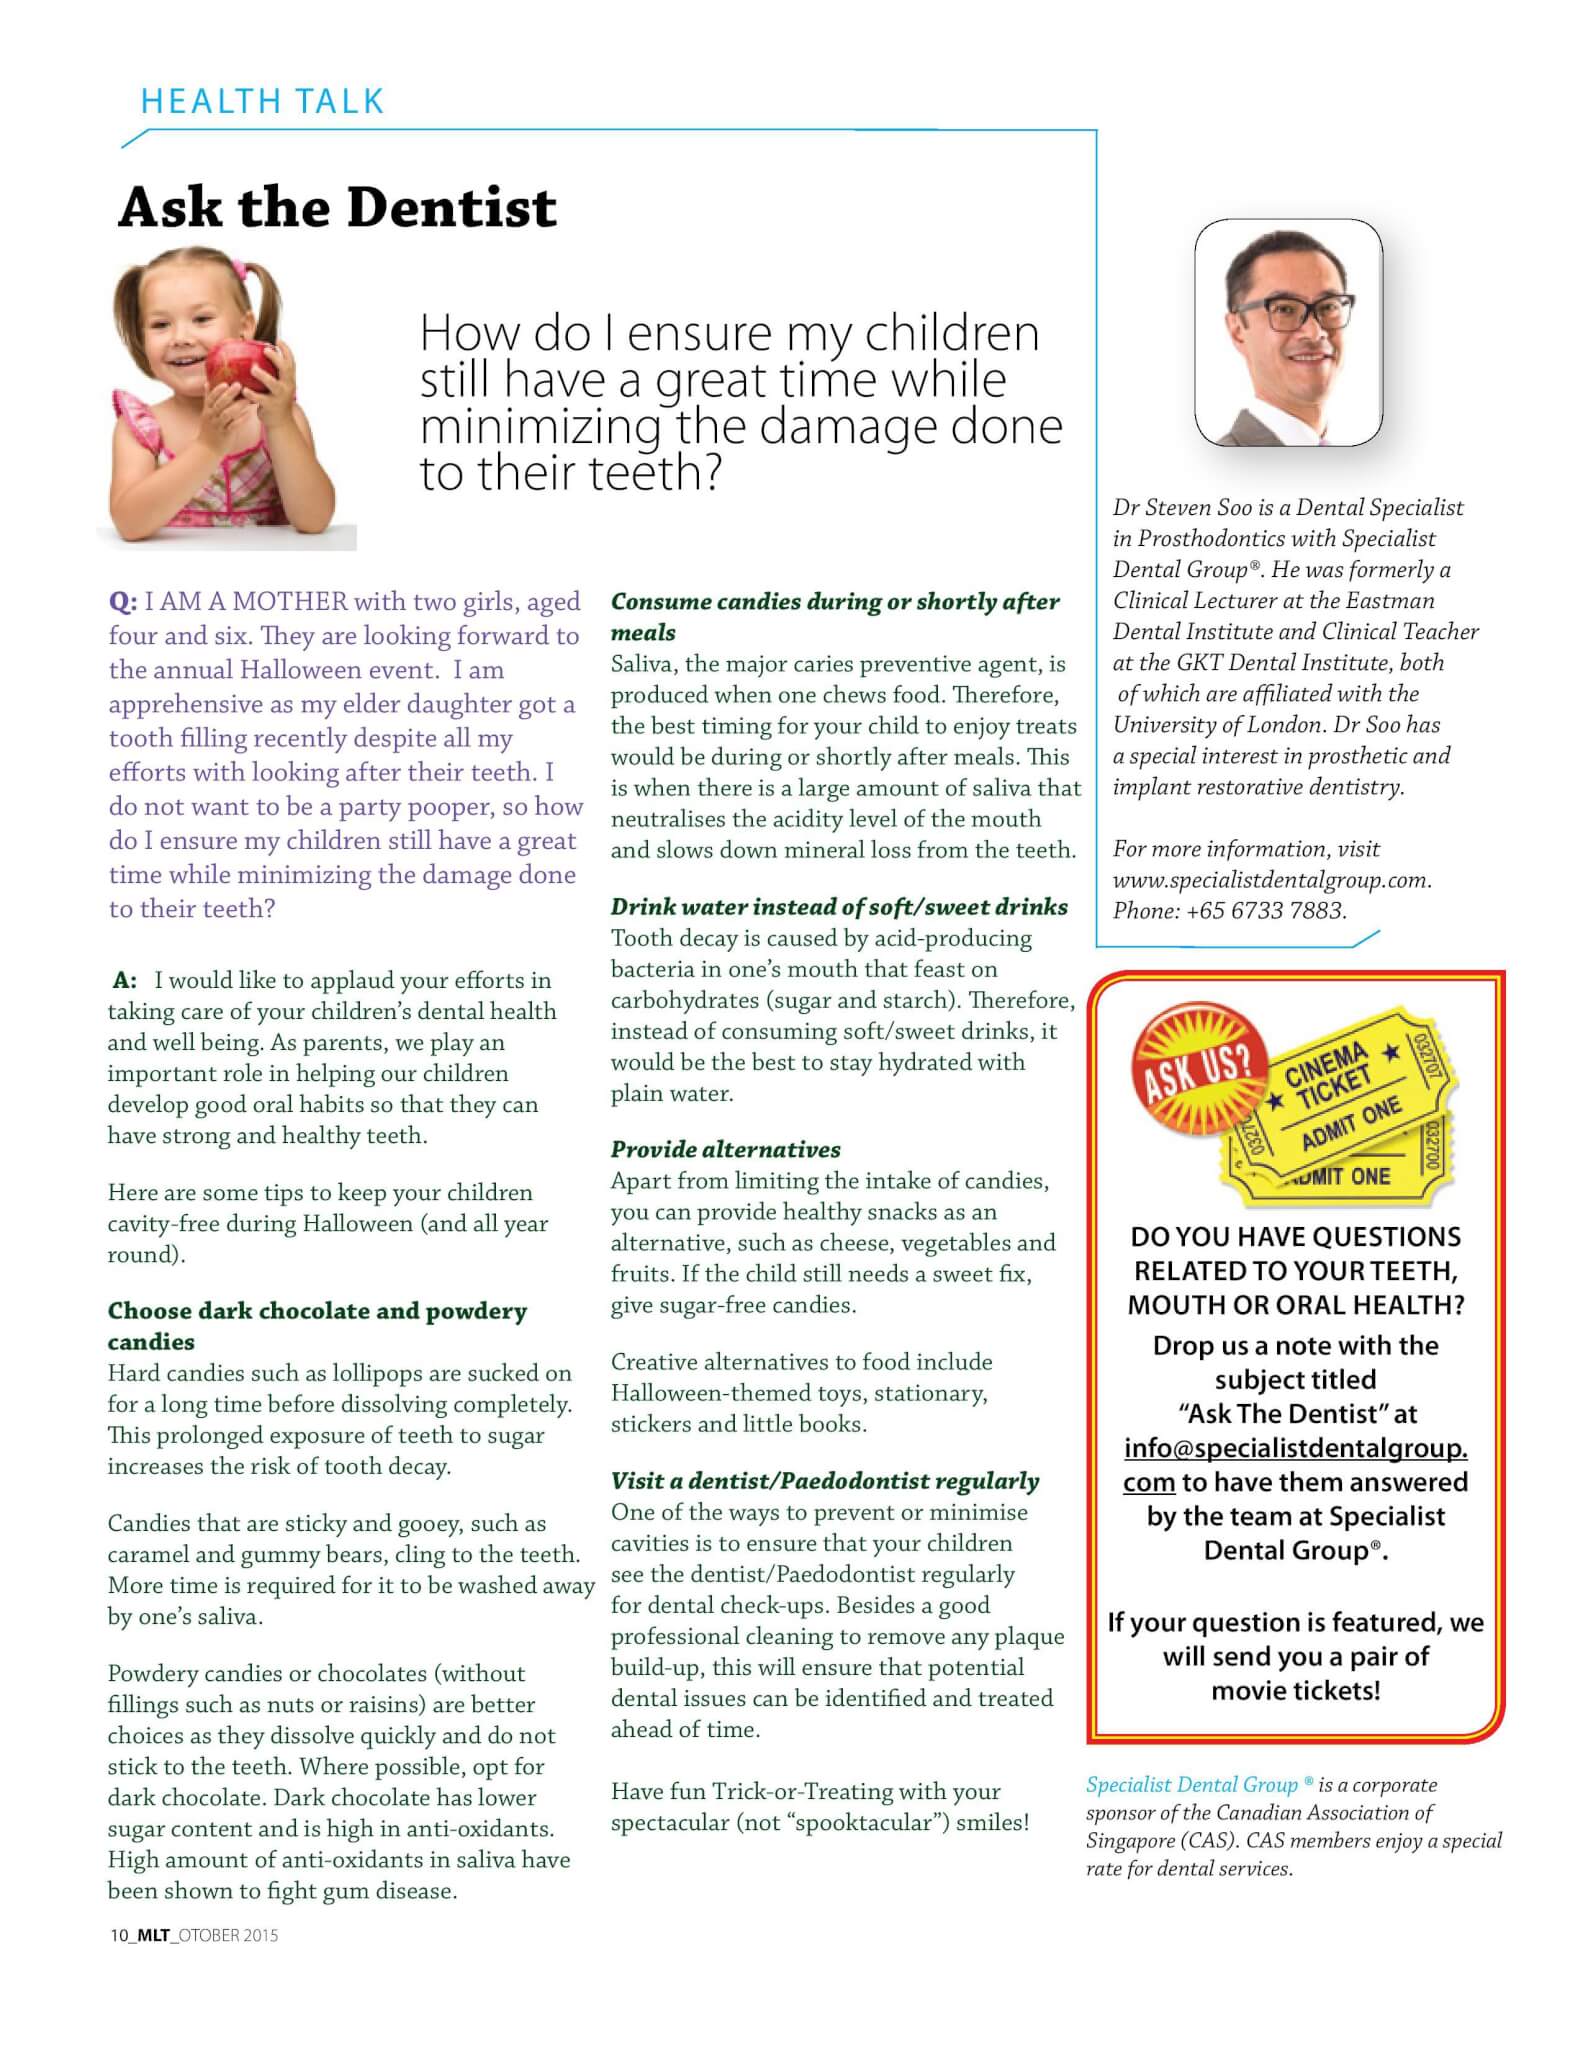 Maple Leaf Times, October 2015: How do I ensure my children still have a great time while minimising the damage done to their teeth?